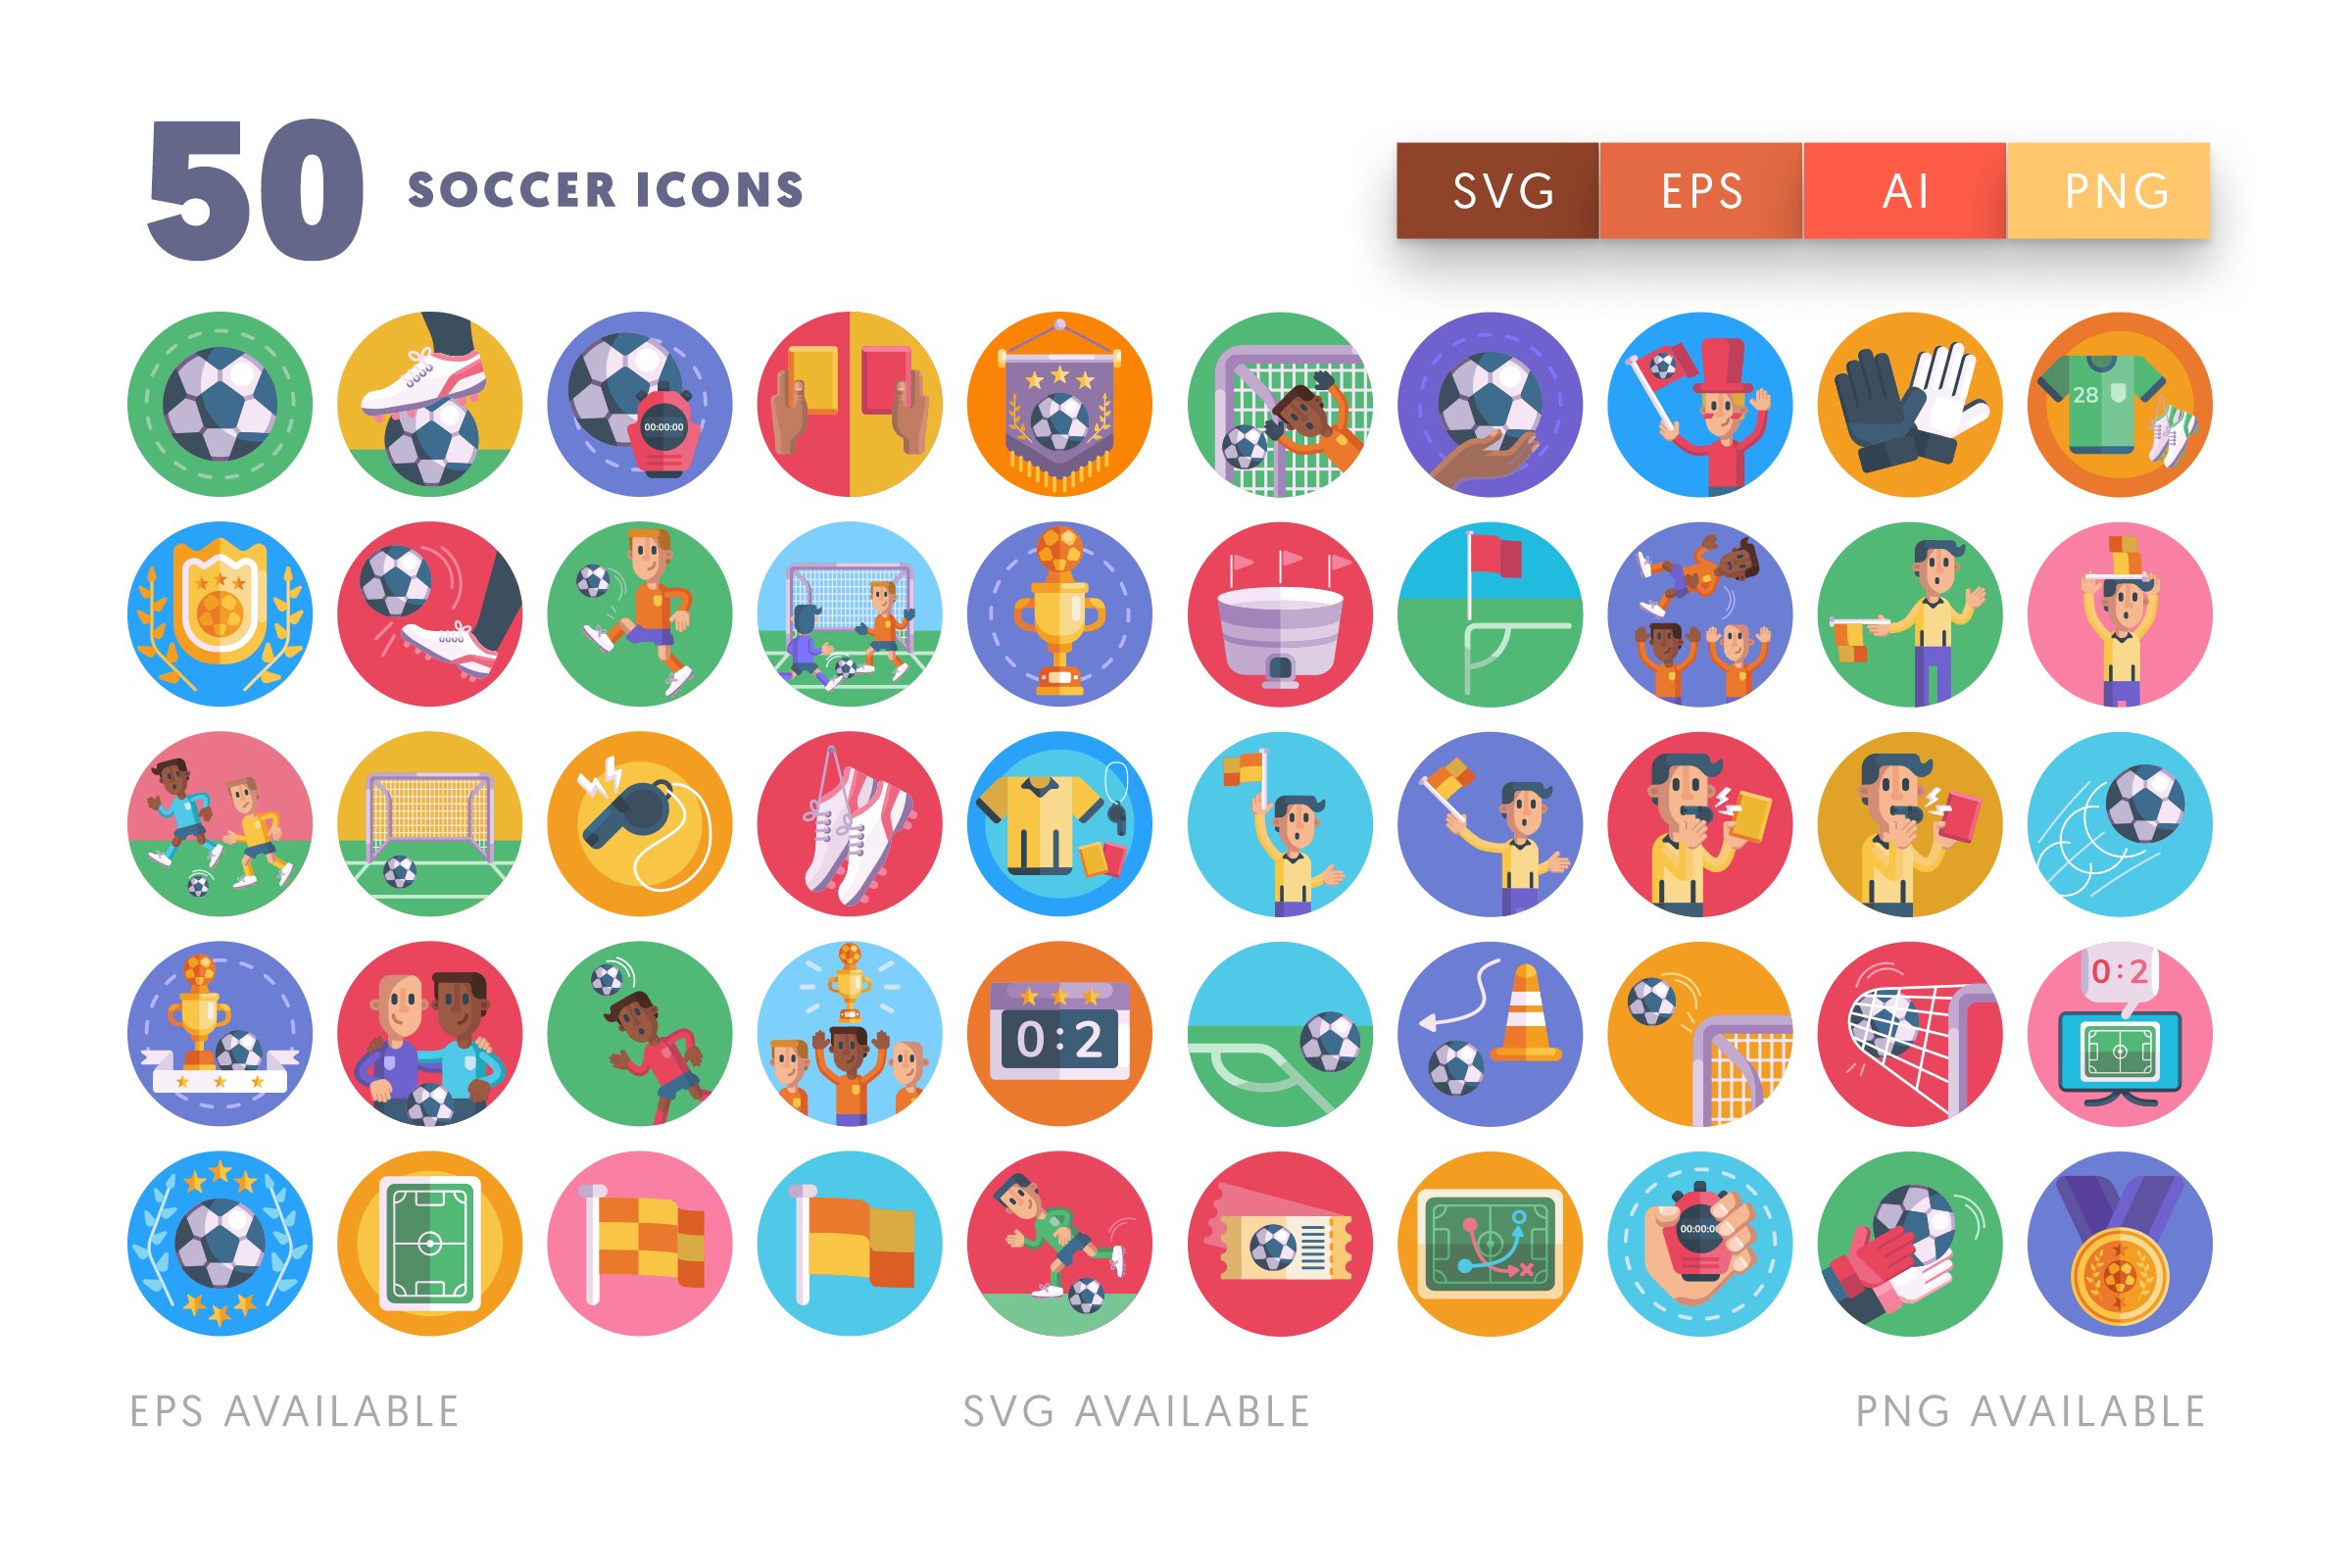 50 Soccer Icons preview image.